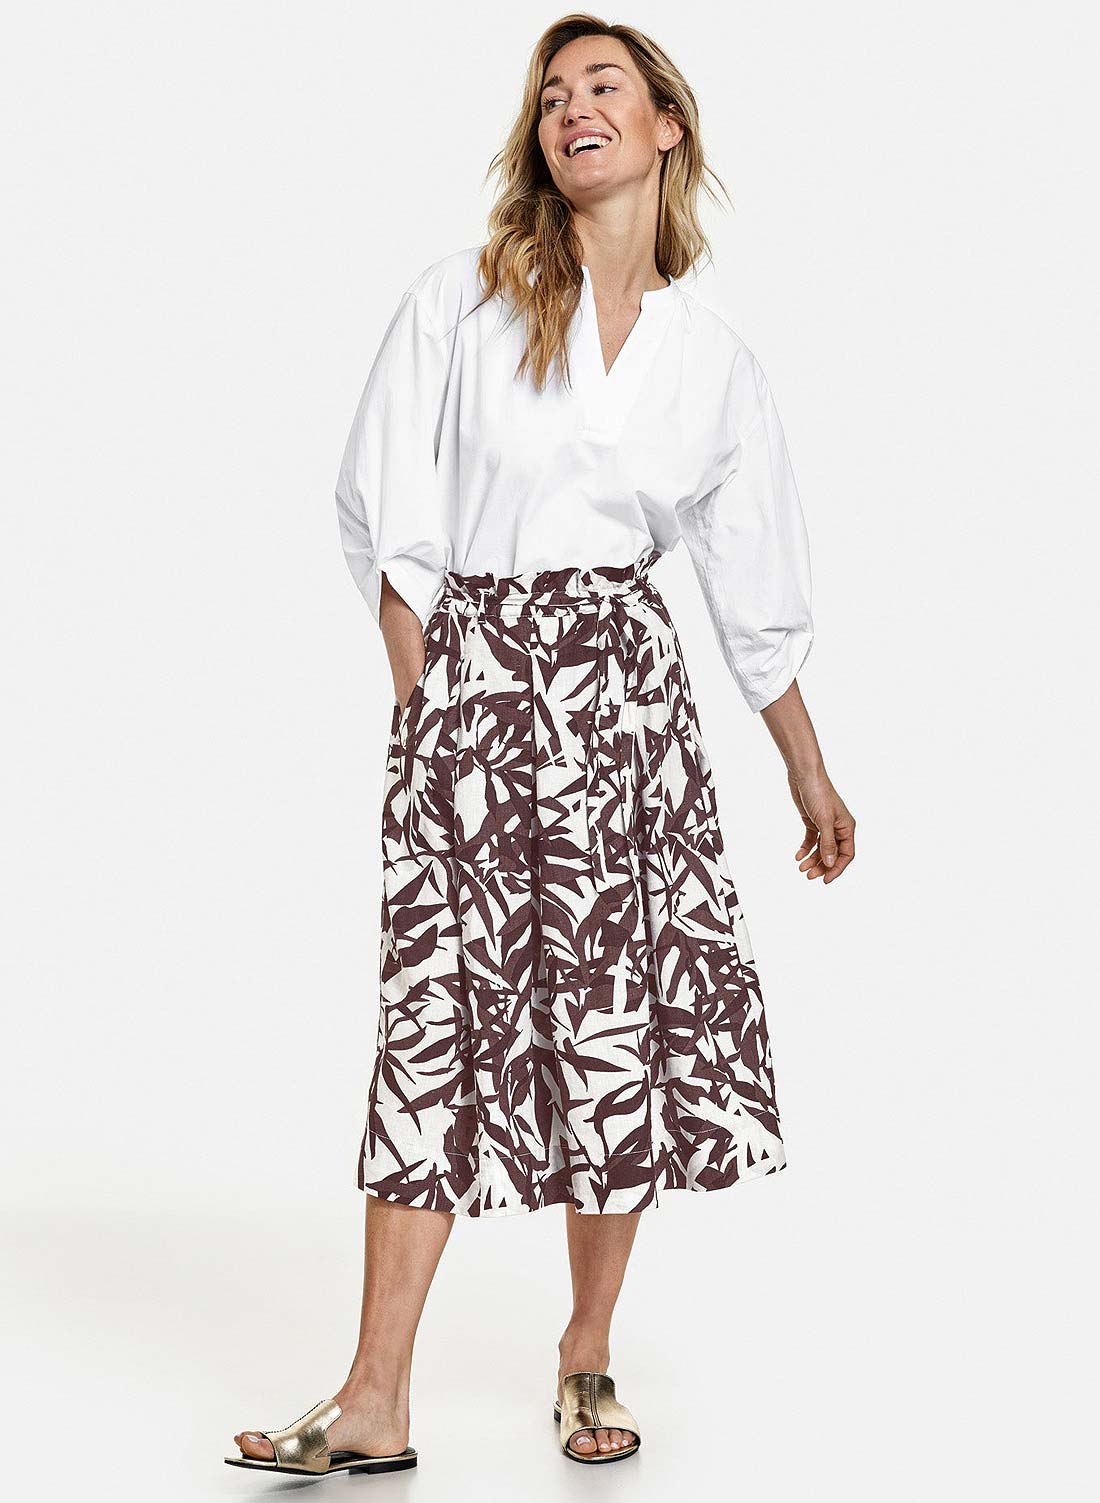 BEVAVA - Shop the Latest Women's Skirts Online